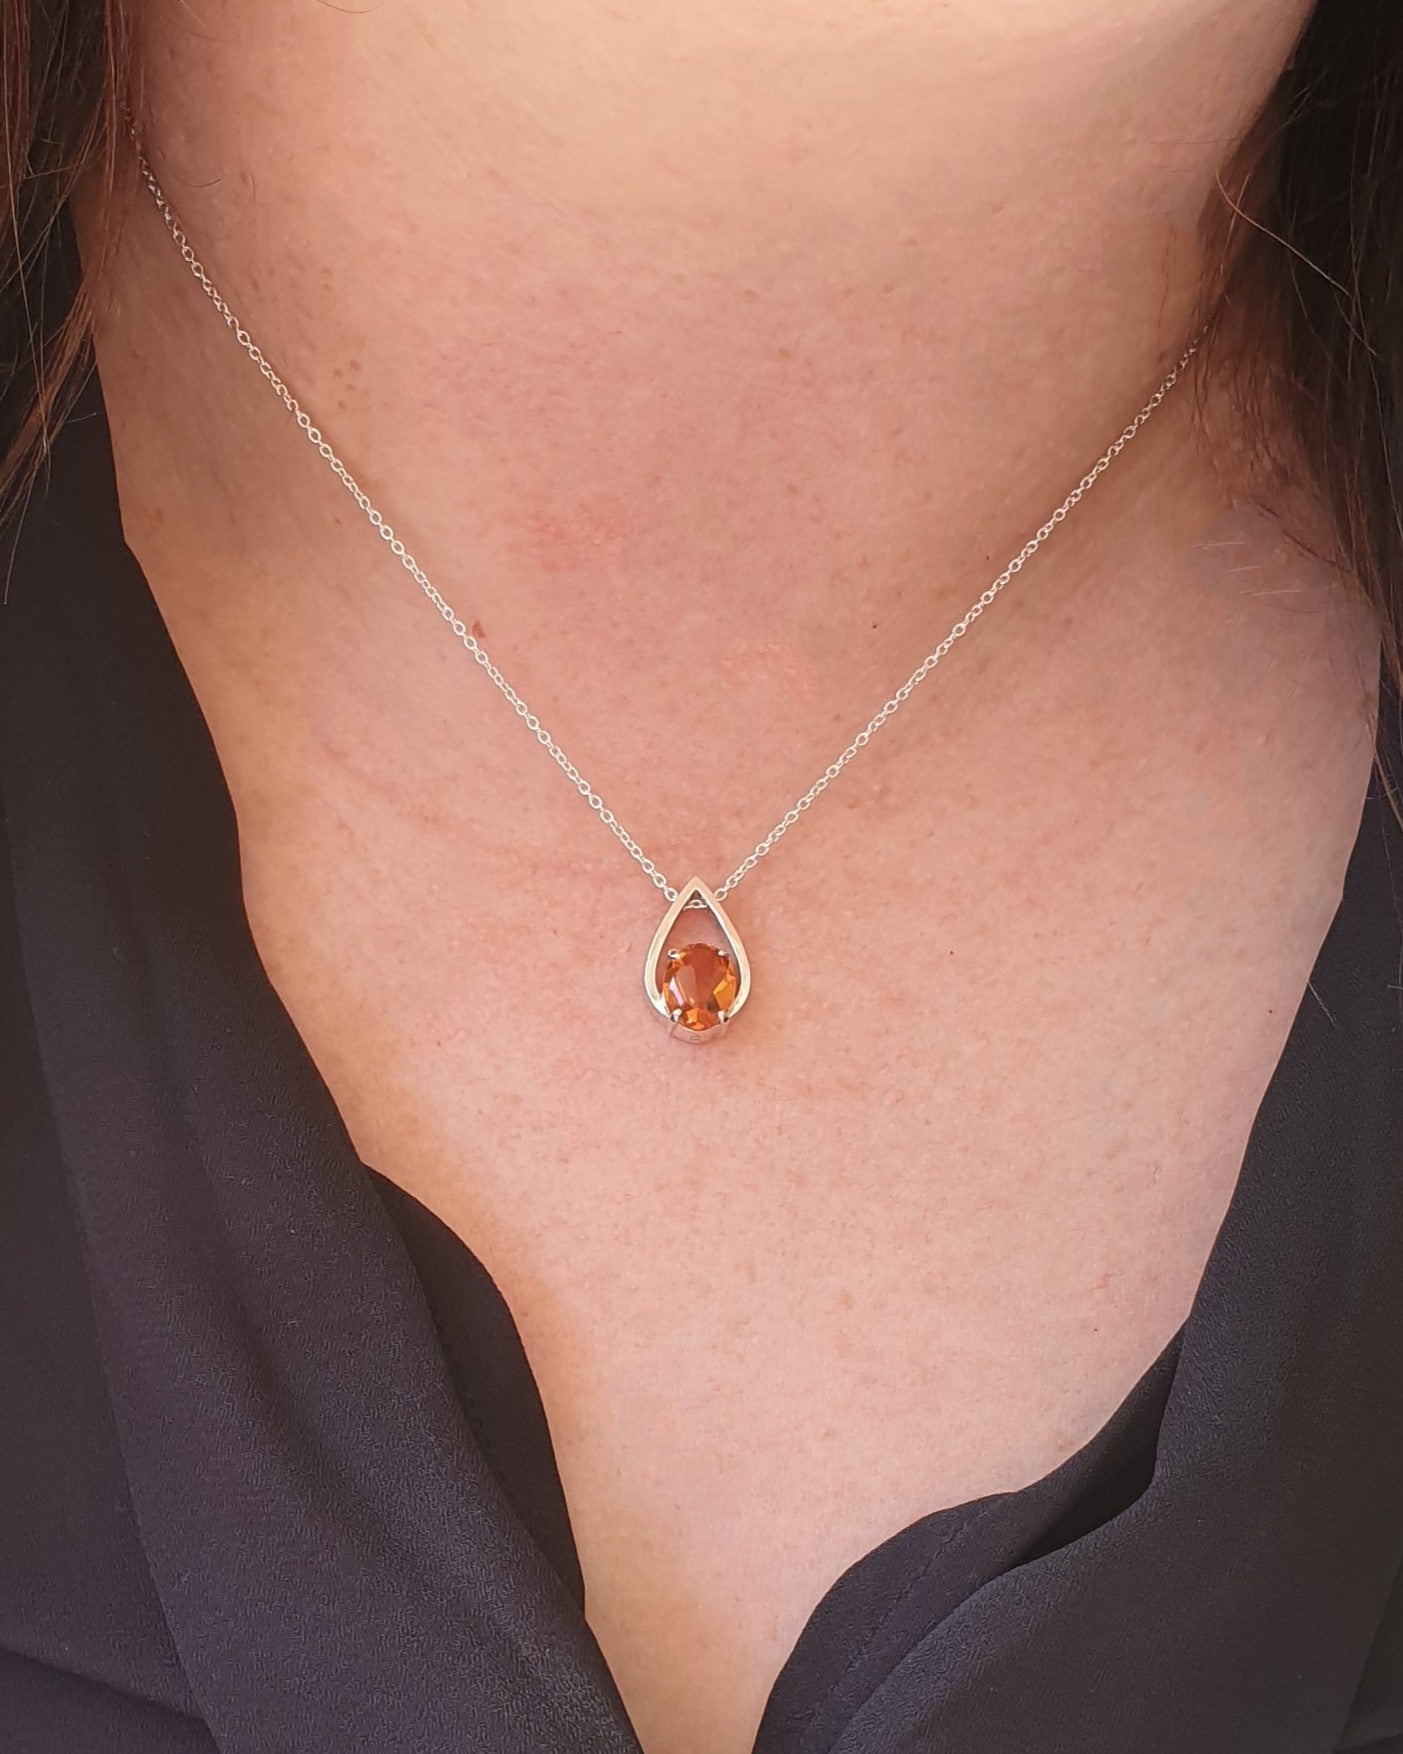 Female wearing an earth-toned Citrine Silver Necklace